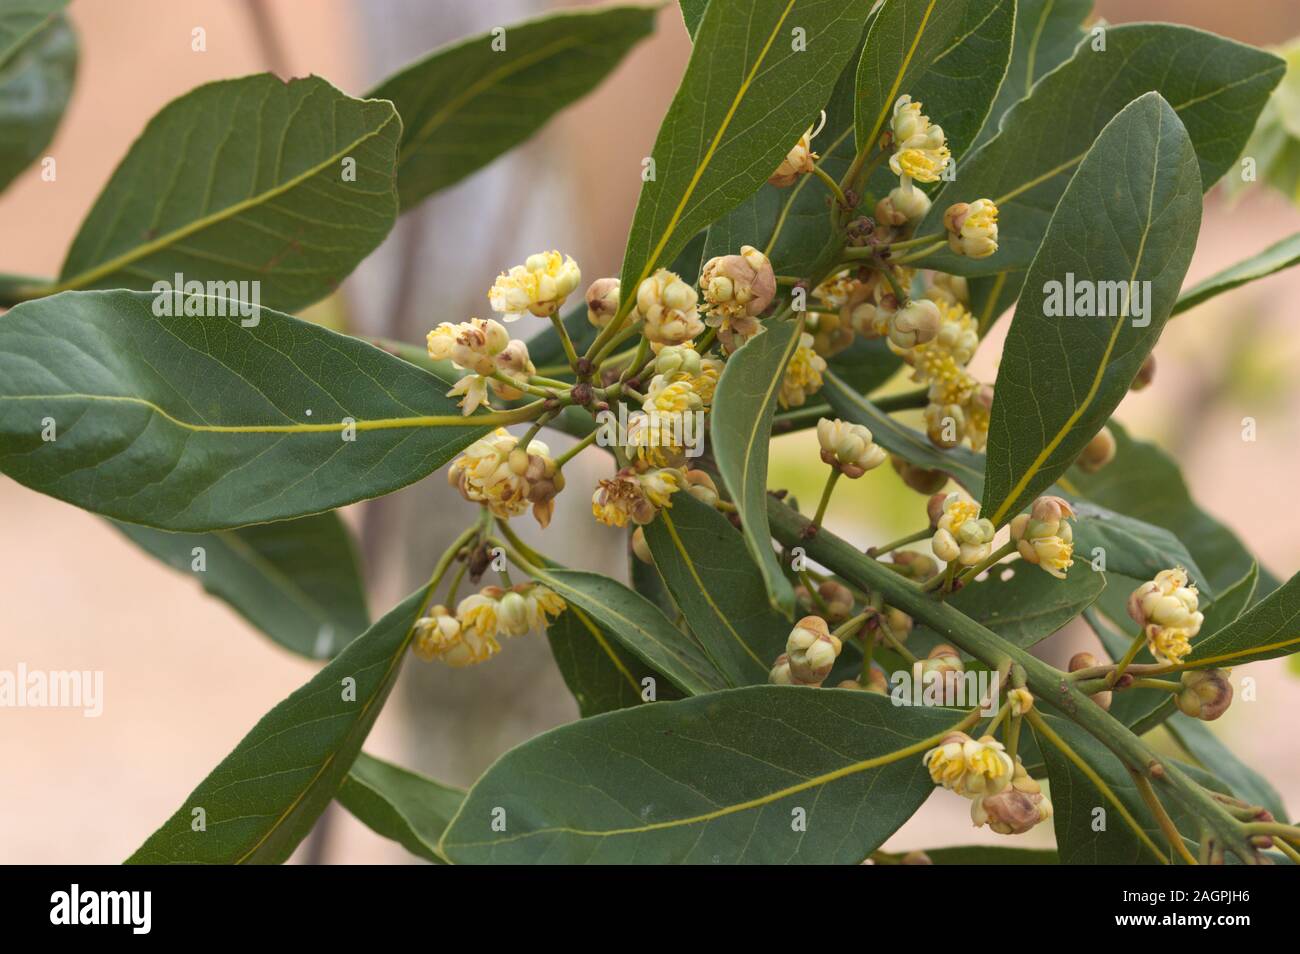 Image representing some branches of a laurel that is in bloom during spring Stock Photo